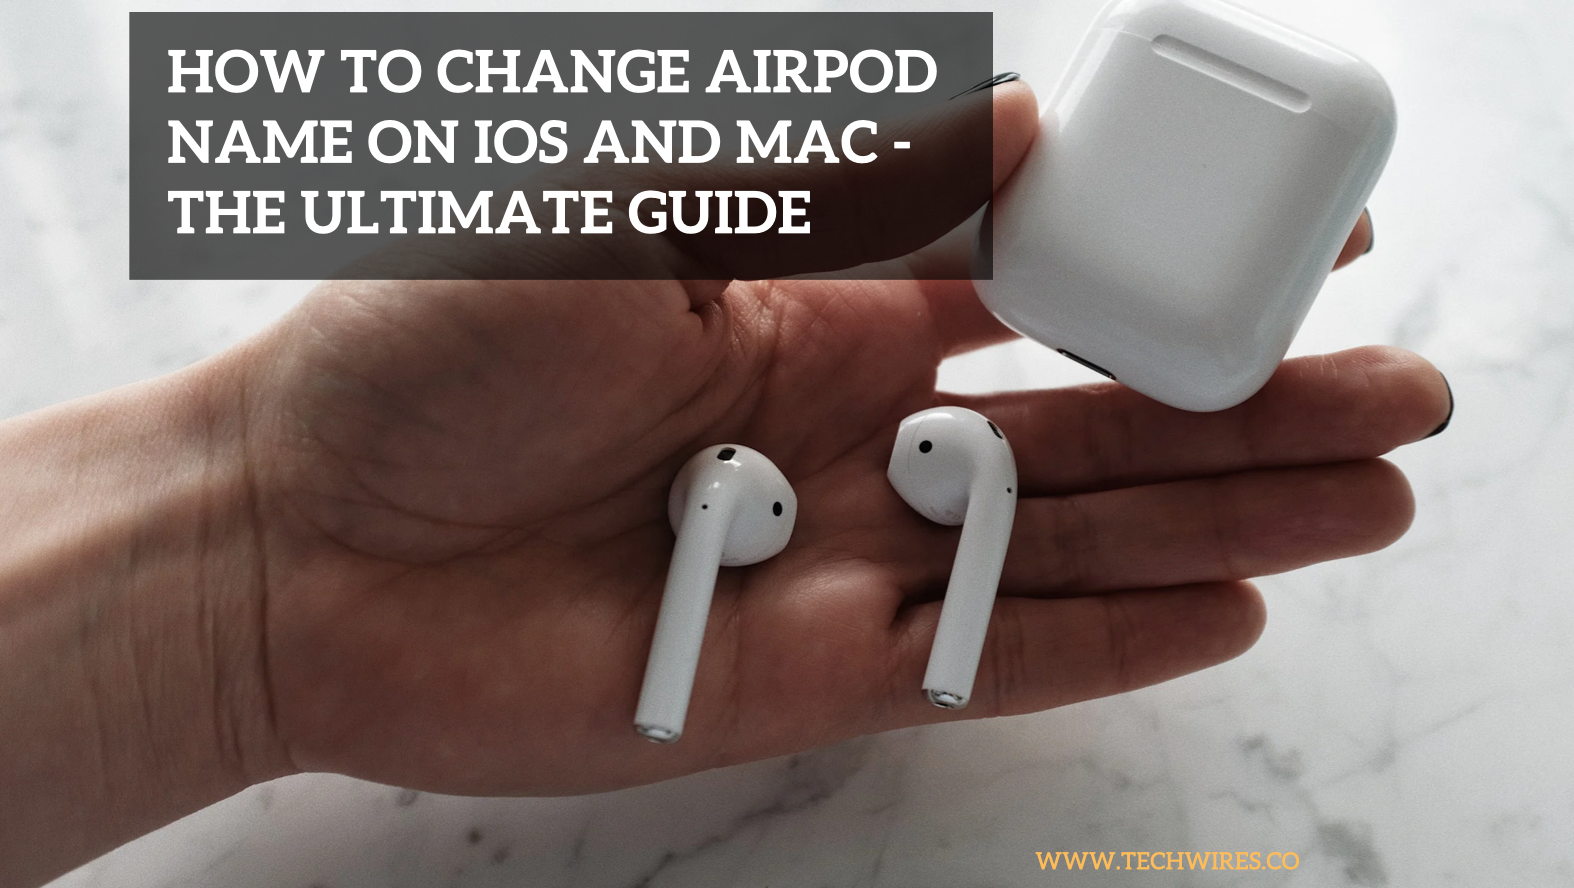 How to Change AirPod Name on iOS and Mac - The Ultimate Guide